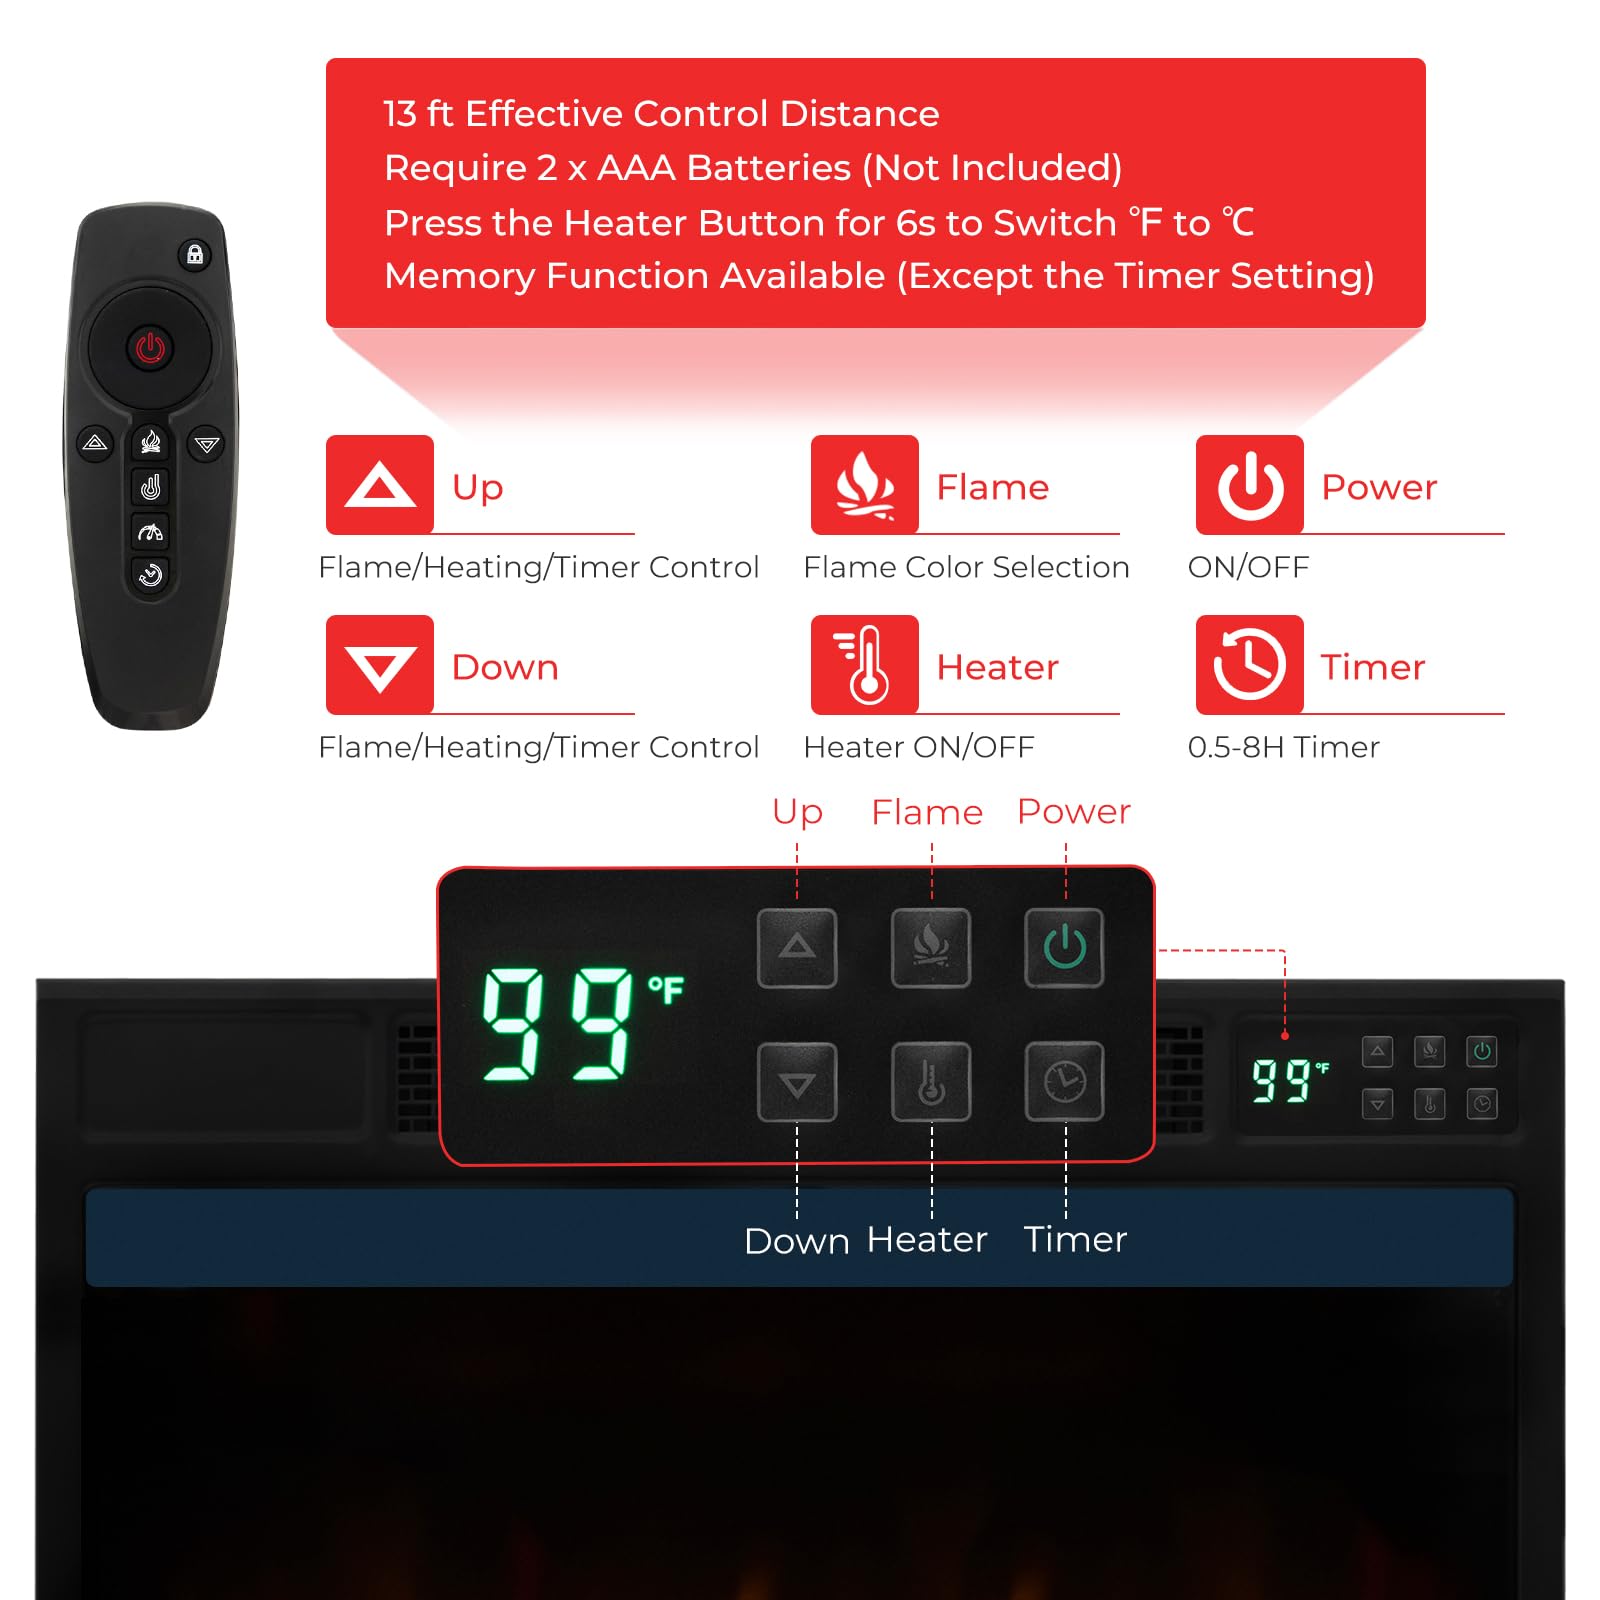 23-Inch Infrared Quartz Electric Fireplace Insert with Remote Control, 1500W - Tangkula